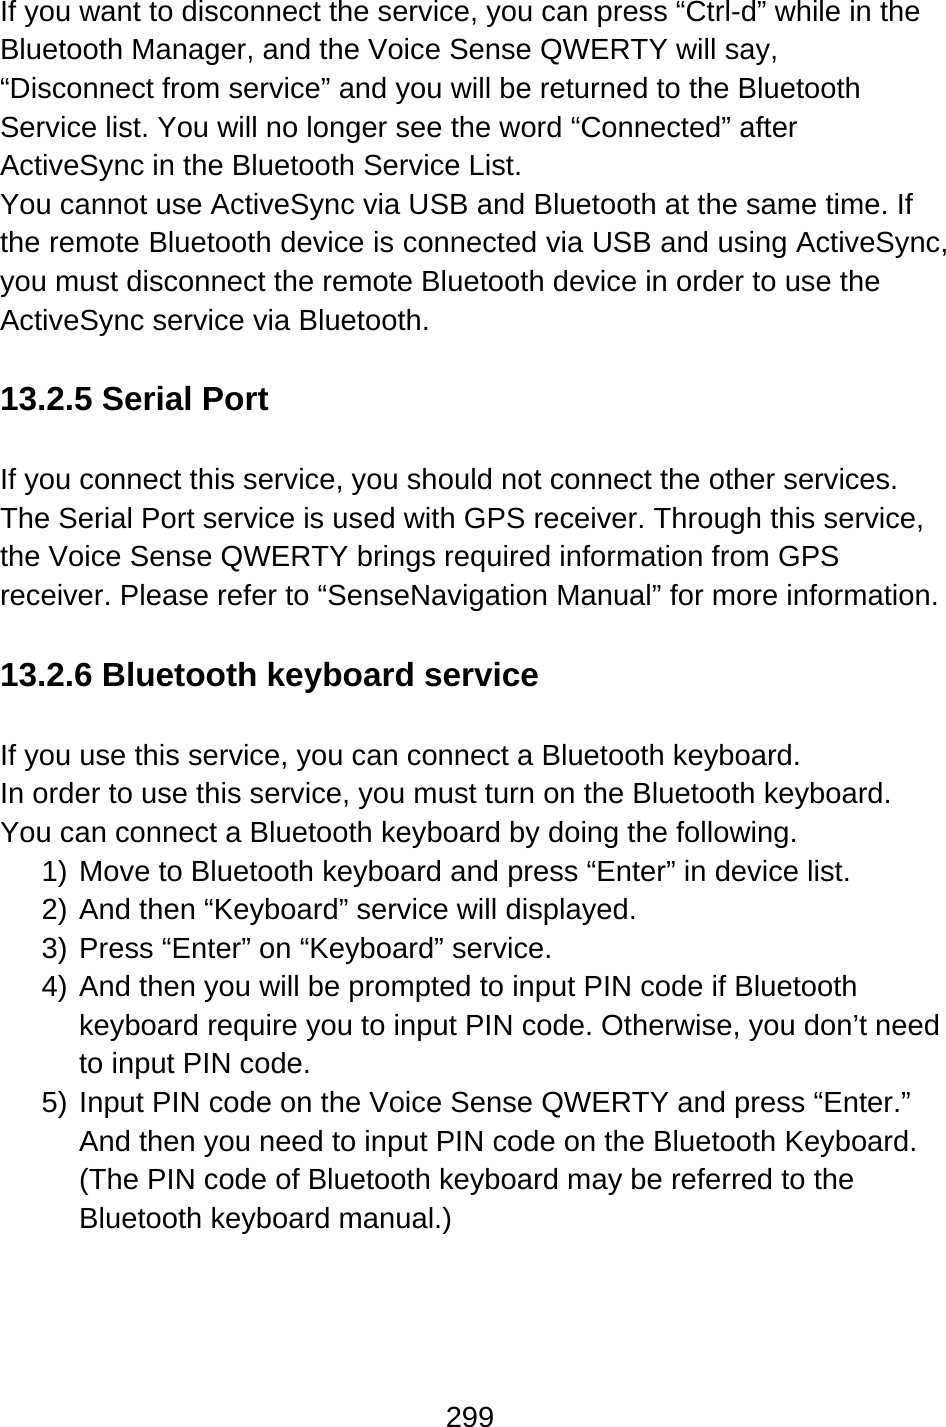 299  If you want to disconnect the service, you can press “Ctrl-d” while in the Bluetooth Manager, and the Voice Sense QWERTY will say, “Disconnect from service” and you will be returned to the Bluetooth Service list. You will no longer see the word “Connected” after ActiveSync in the Bluetooth Service List. You cannot use ActiveSync via USB and Bluetooth at the same time. If the remote Bluetooth device is connected via USB and using ActiveSync, you must disconnect the remote Bluetooth device in order to use the ActiveSync service via Bluetooth.  13.2.5 Serial Port  If you connect this service, you should not connect the other services. The Serial Port service is used with GPS receiver. Through this service, the Voice Sense QWERTY brings required information from GPS receiver. Please refer to “SenseNavigation Manual” for more information.  13.2.6 Bluetooth keyboard service  If you use this service, you can connect a Bluetooth keyboard.   In order to use this service, you must turn on the Bluetooth keyboard. You can connect a Bluetooth keyboard by doing the following. 1) Move to Bluetooth keyboard and press “Enter” in device list. 2) And then “Keyboard” service will displayed. 3) Press “Enter” on “Keyboard” service. 4) And then you will be prompted to input PIN code if Bluetooth keyboard require you to input PIN code. Otherwise, you don’t need to input PIN code. 5) Input PIN code on the Voice Sense QWERTY and press “Enter.” And then you need to input PIN code on the Bluetooth Keyboard. (The PIN code of Bluetooth keyboard may be referred to the Bluetooth keyboard manual.)     